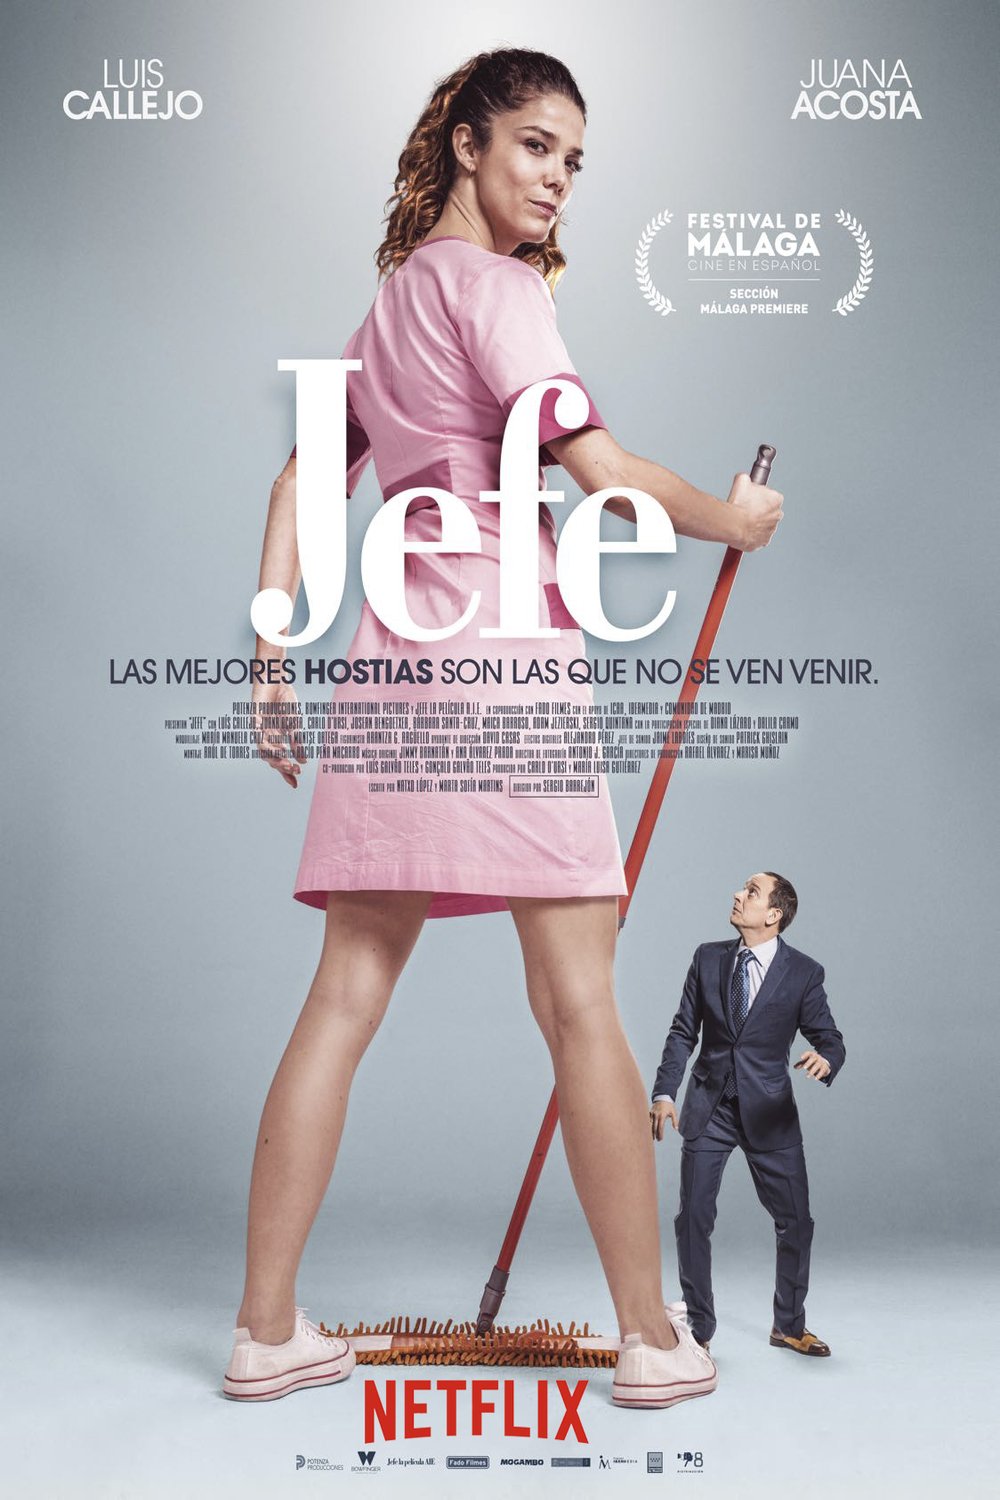 Spanish poster of the movie Jefe